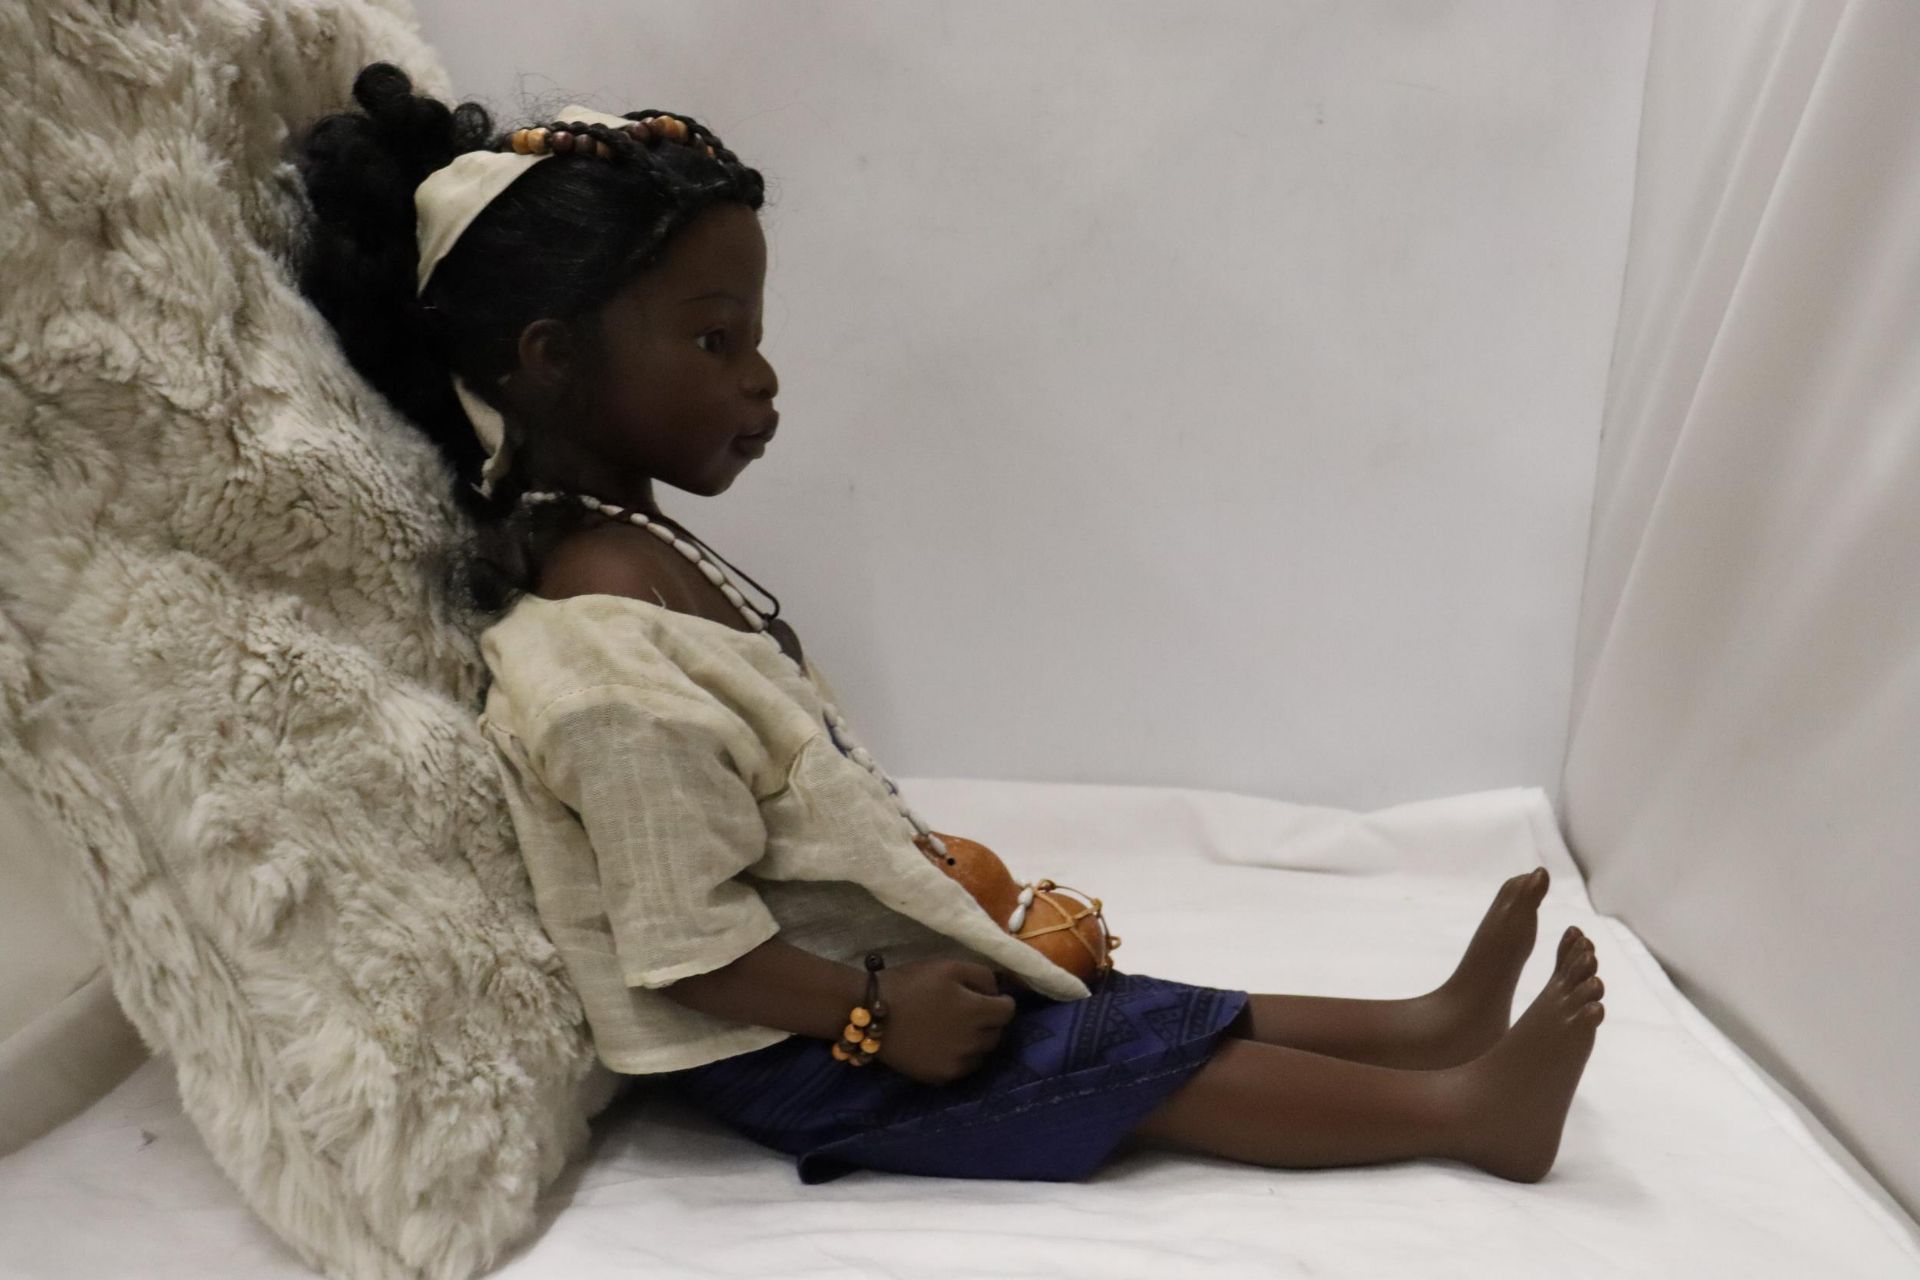 A GOTZ PSH 'PHILLIP HEATH' AFRICAN GIRL DOLL IN TRADITIONAL DRESS - Image 4 of 9